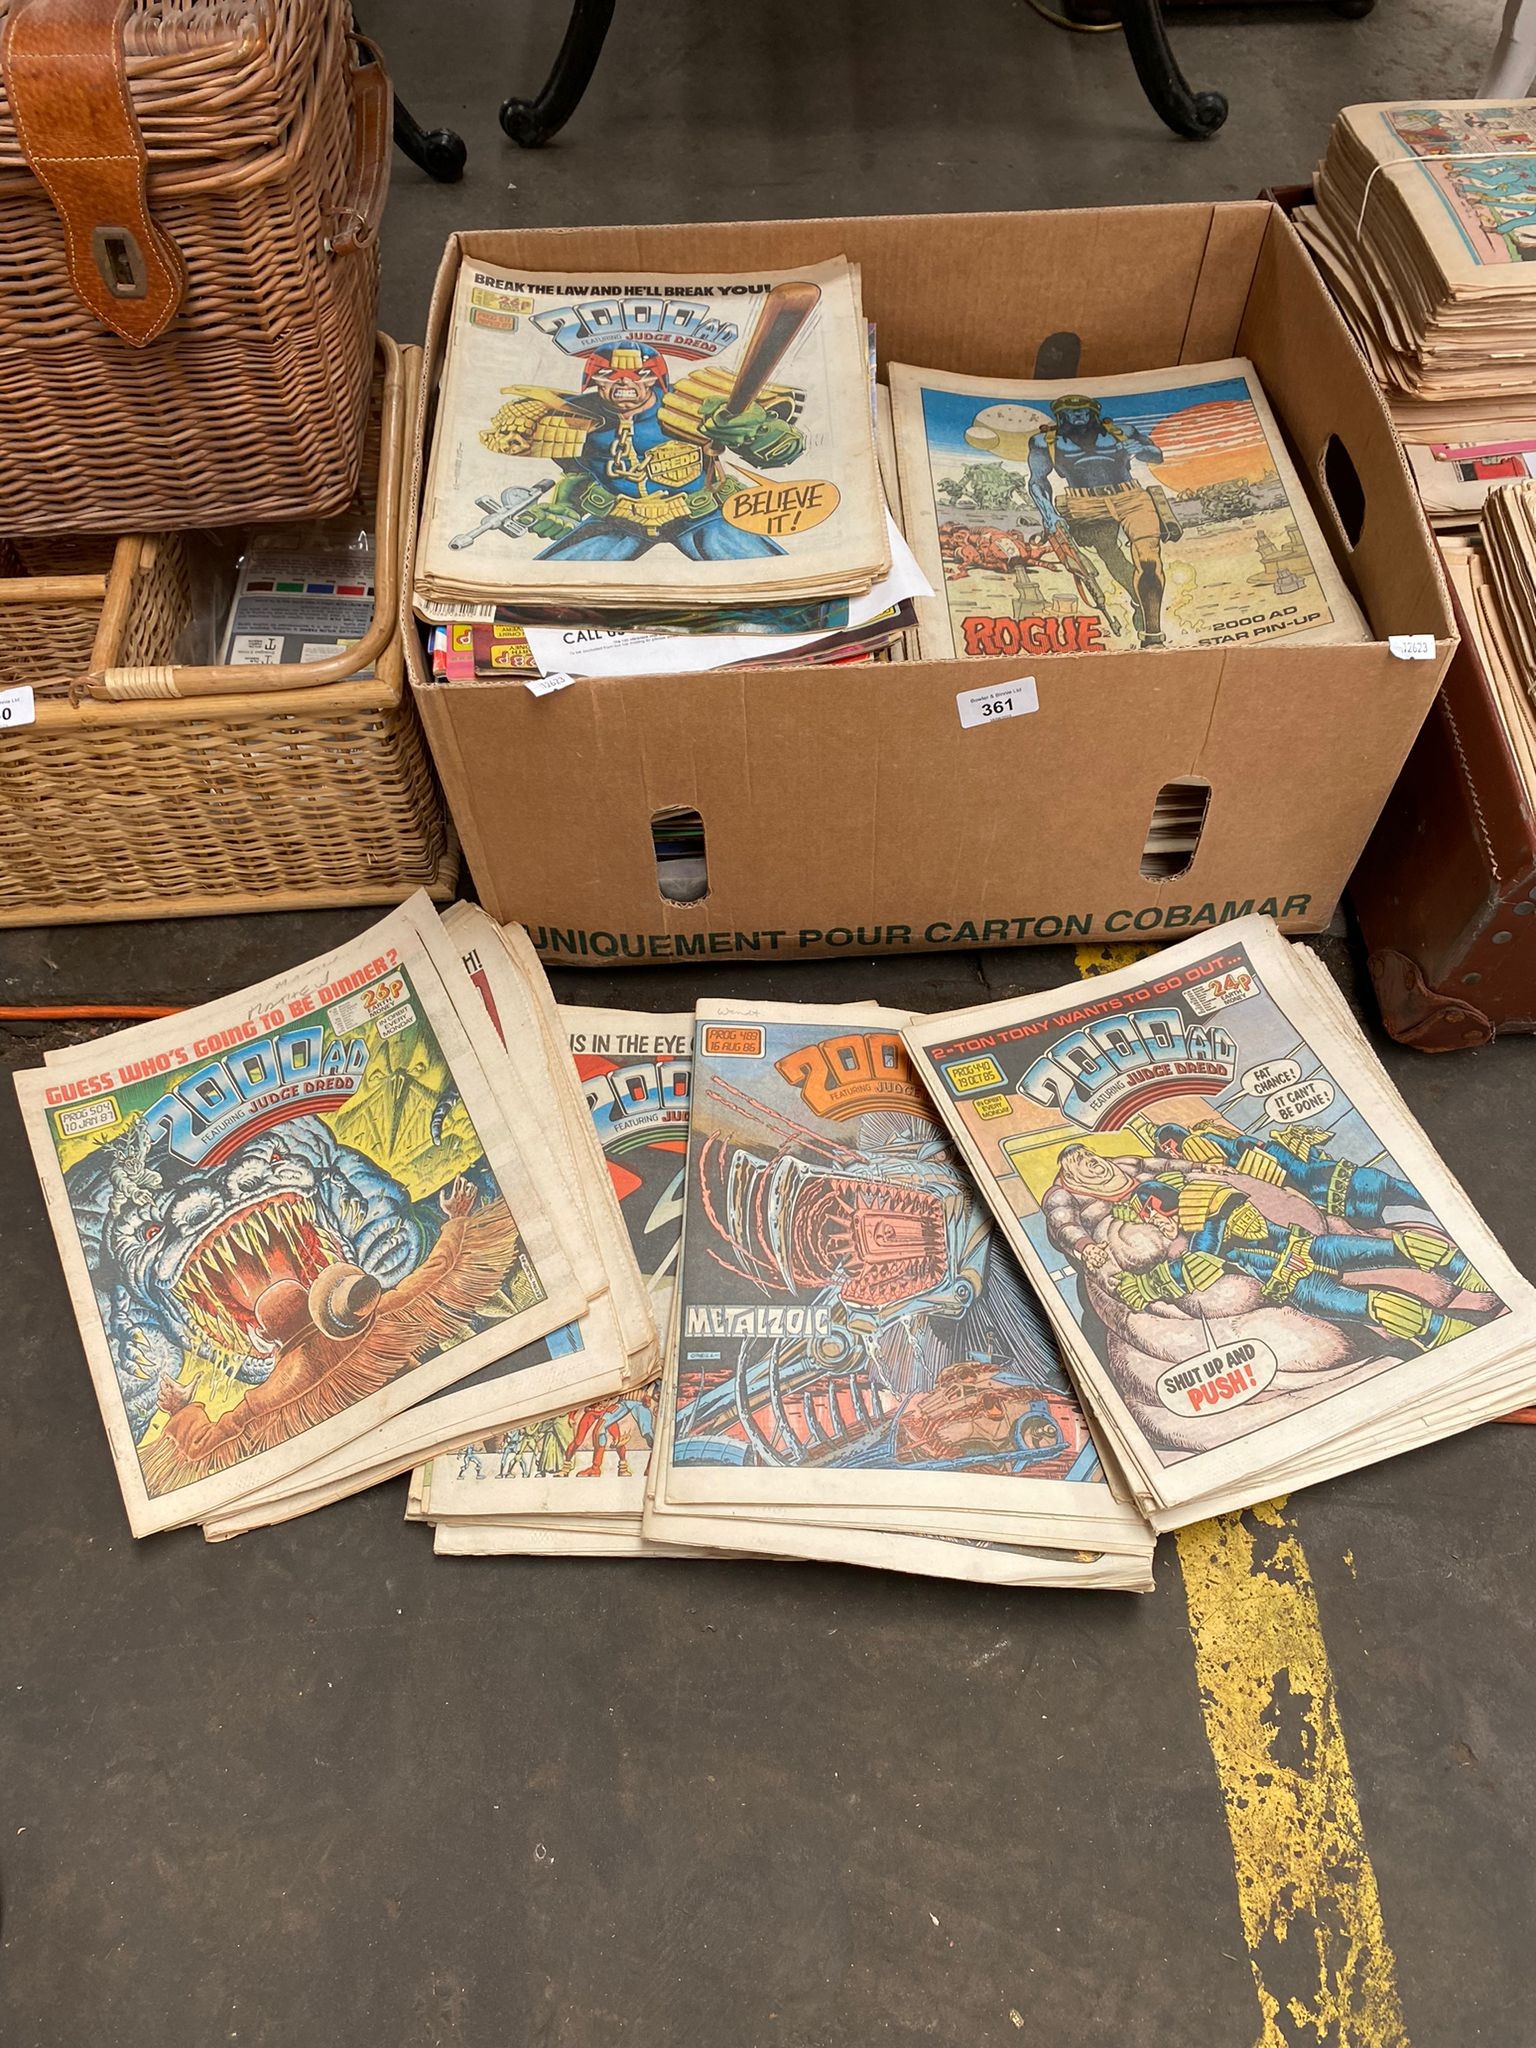 A Box full of 2000AD Comics from the 1980's